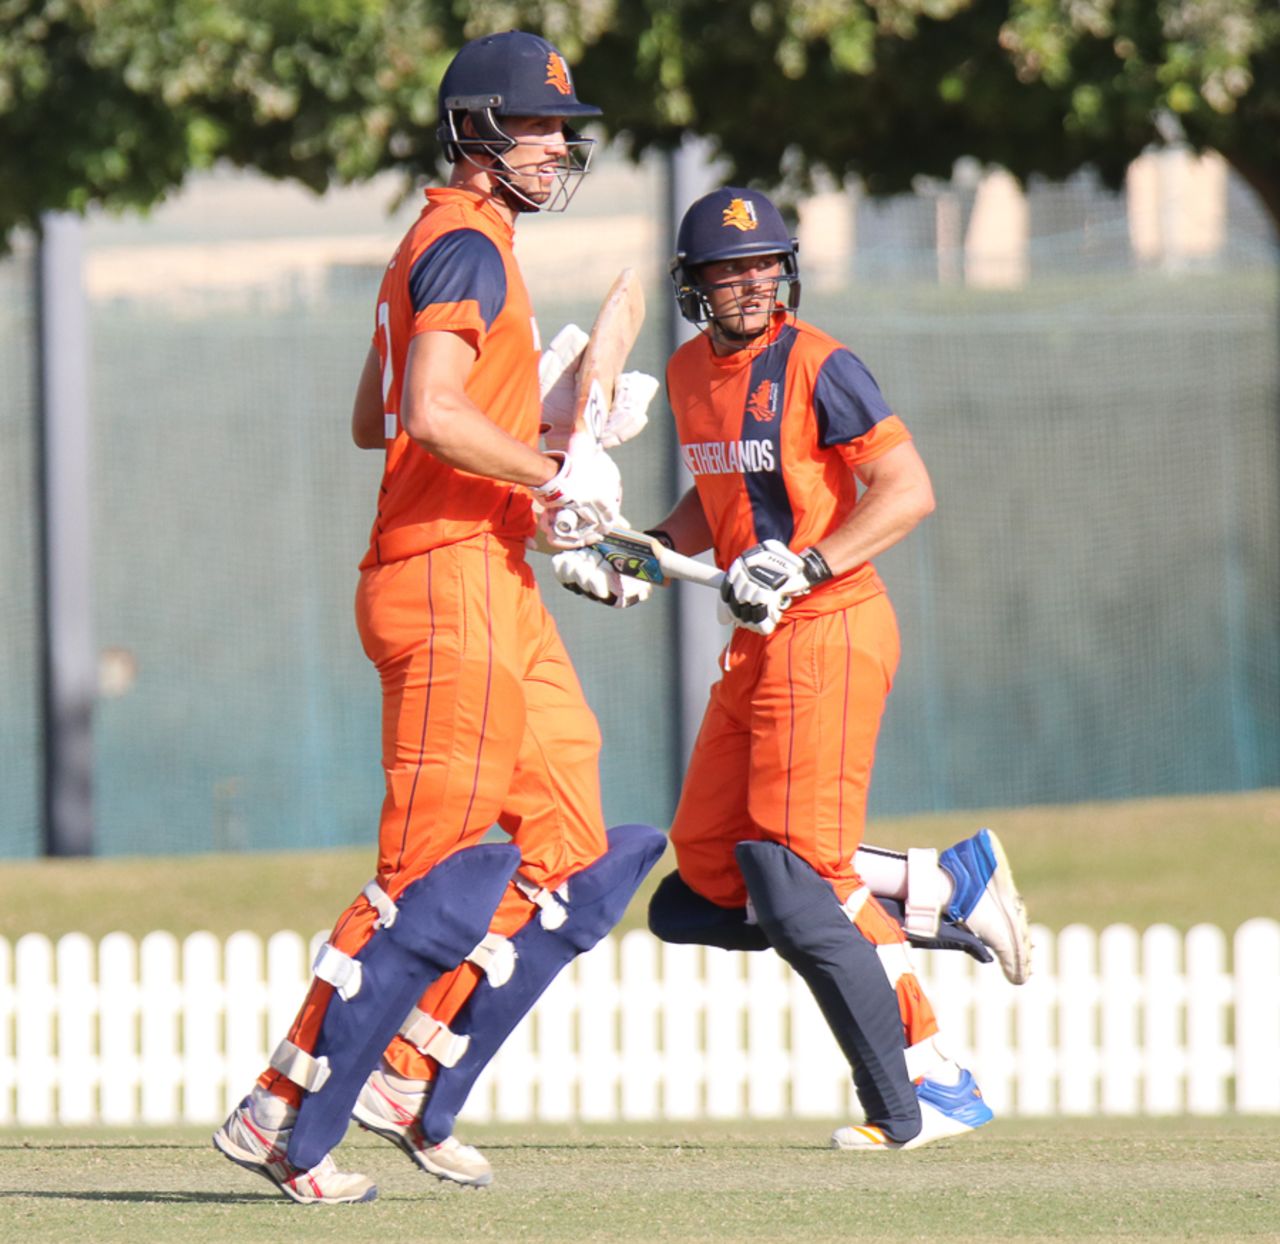 Ben Cooper and Wesley Barresi produced a WCL Championship record partnership for any wicket of 236 runs, Namibia v Netherlands, 2015-17 WCL Championship, Dubai, December 6, 2017